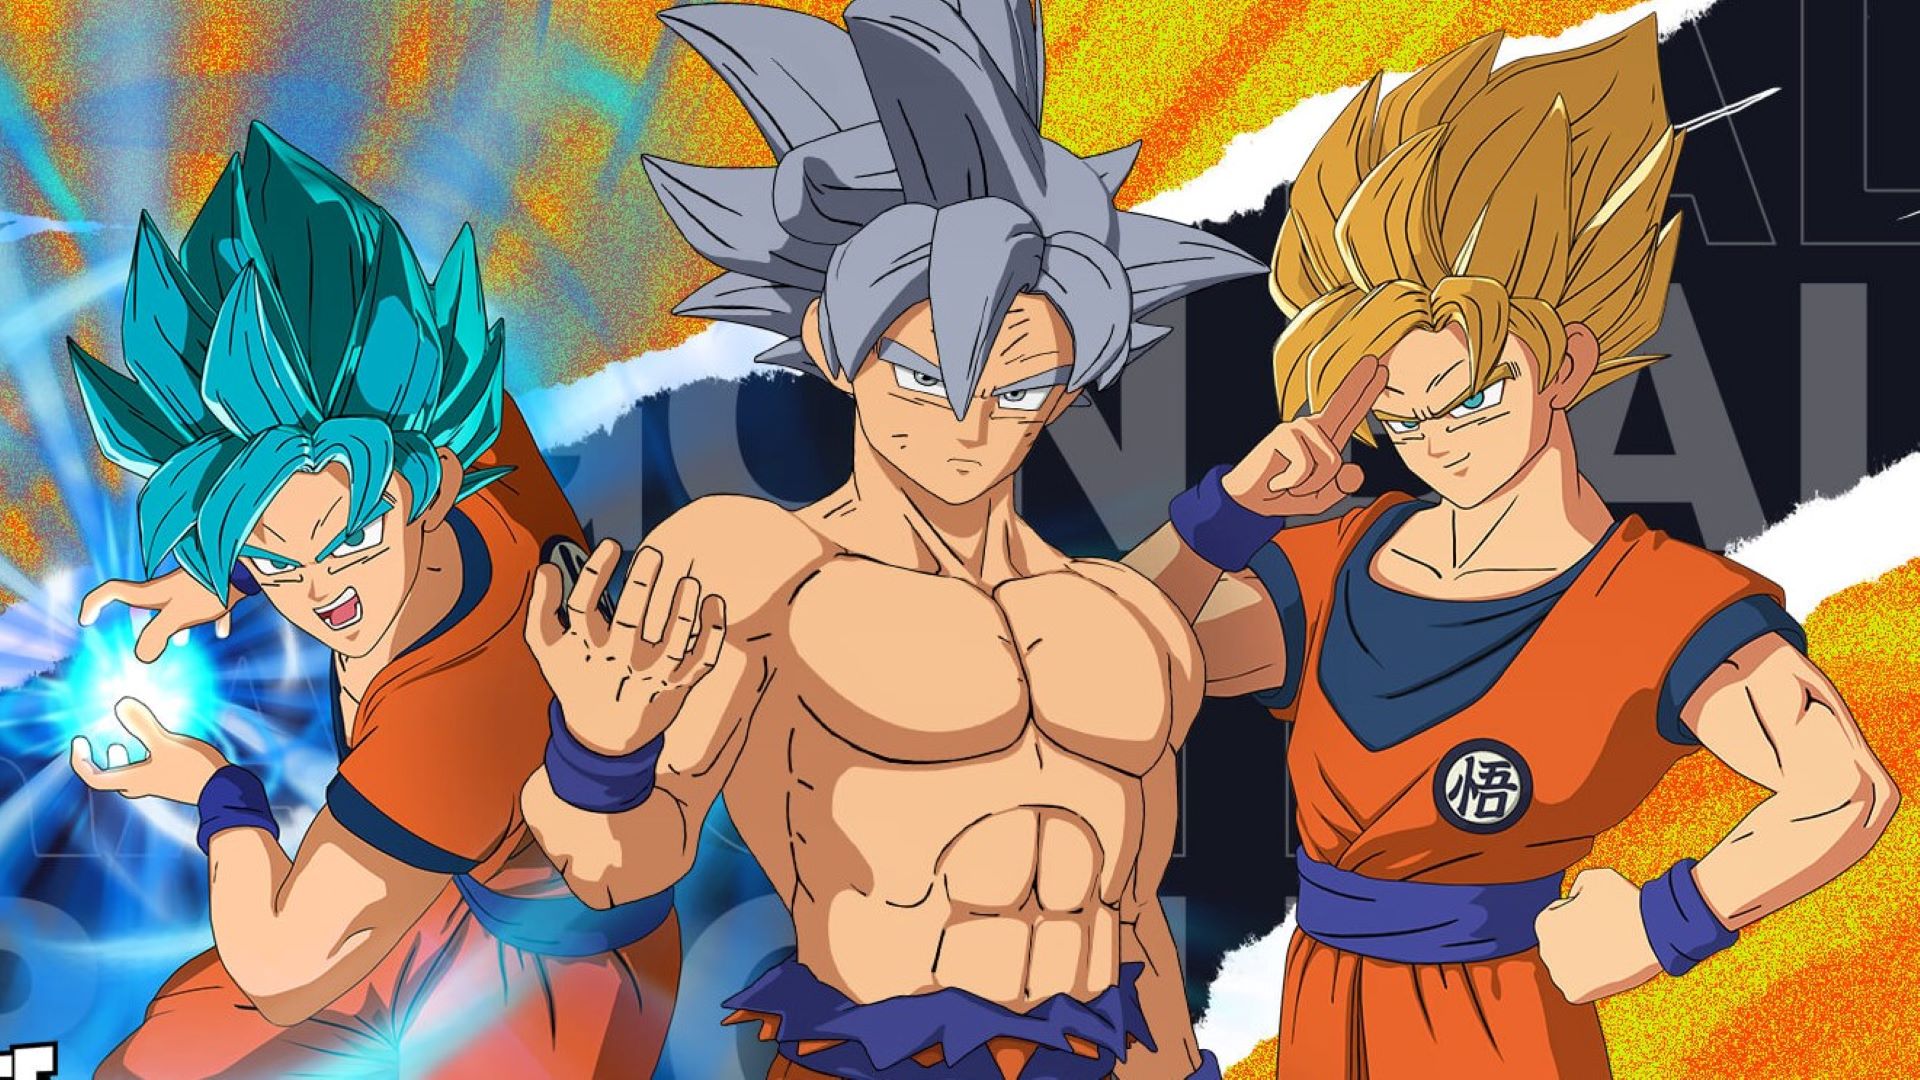 Fortnite Goku’s head is shrinking, and it actually looks better